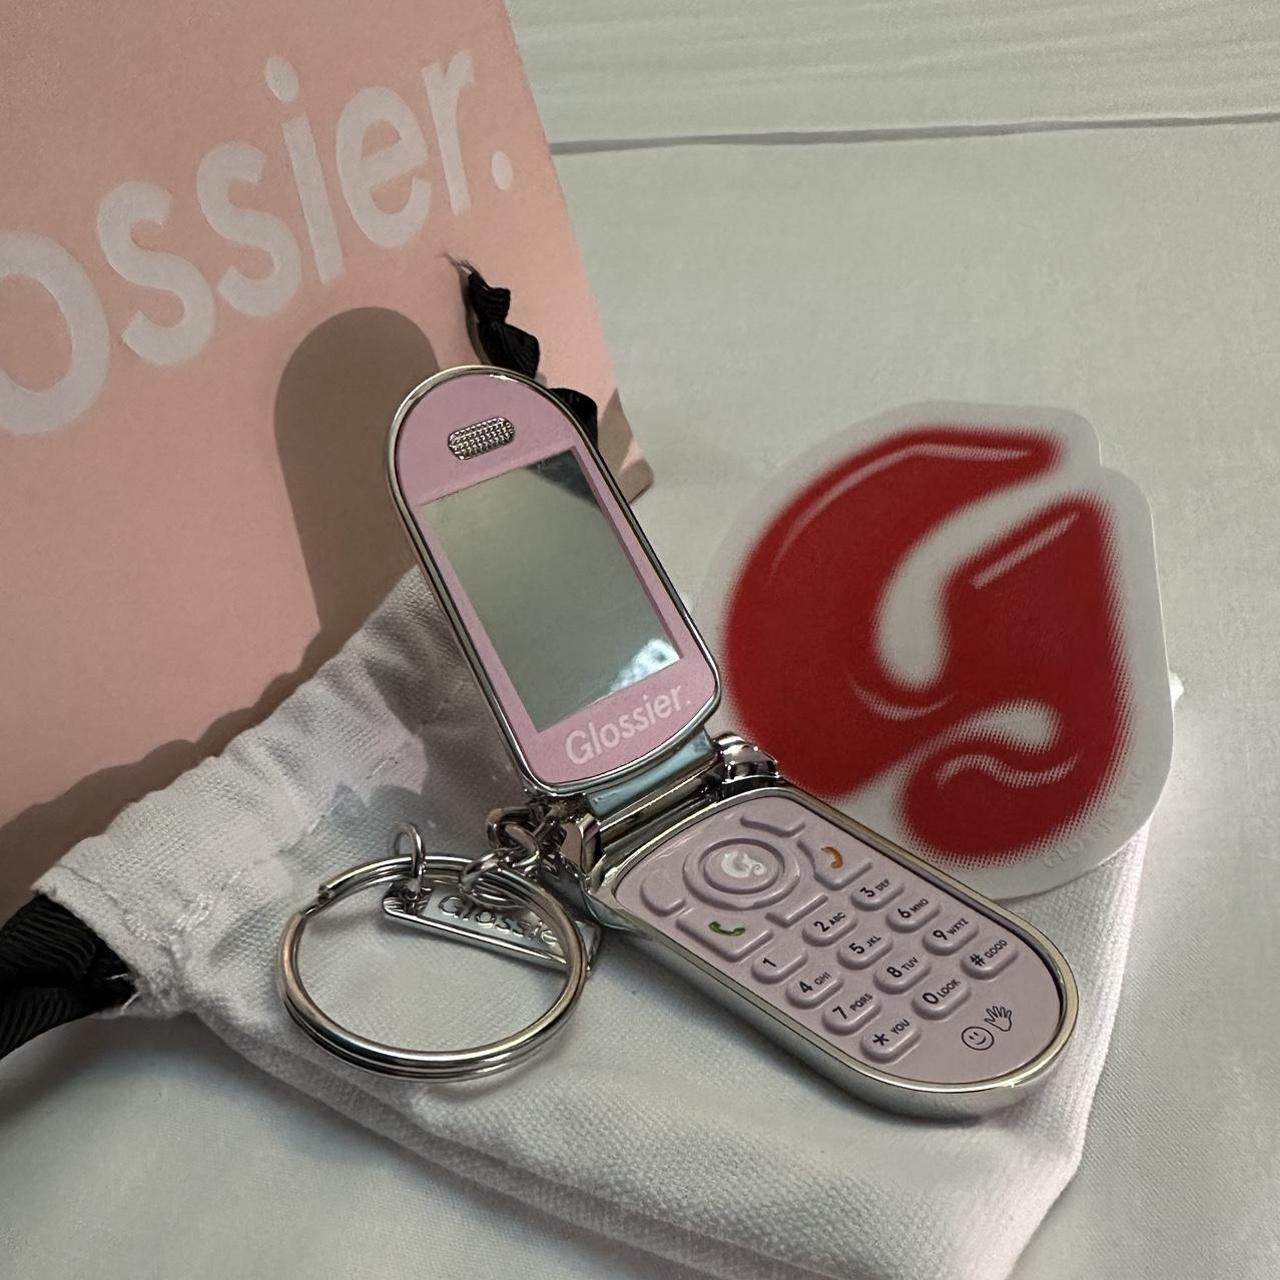 Glossier Los Angeles Cell Flip Phone Keychain Store Exclusive Mirror  Compact NEW